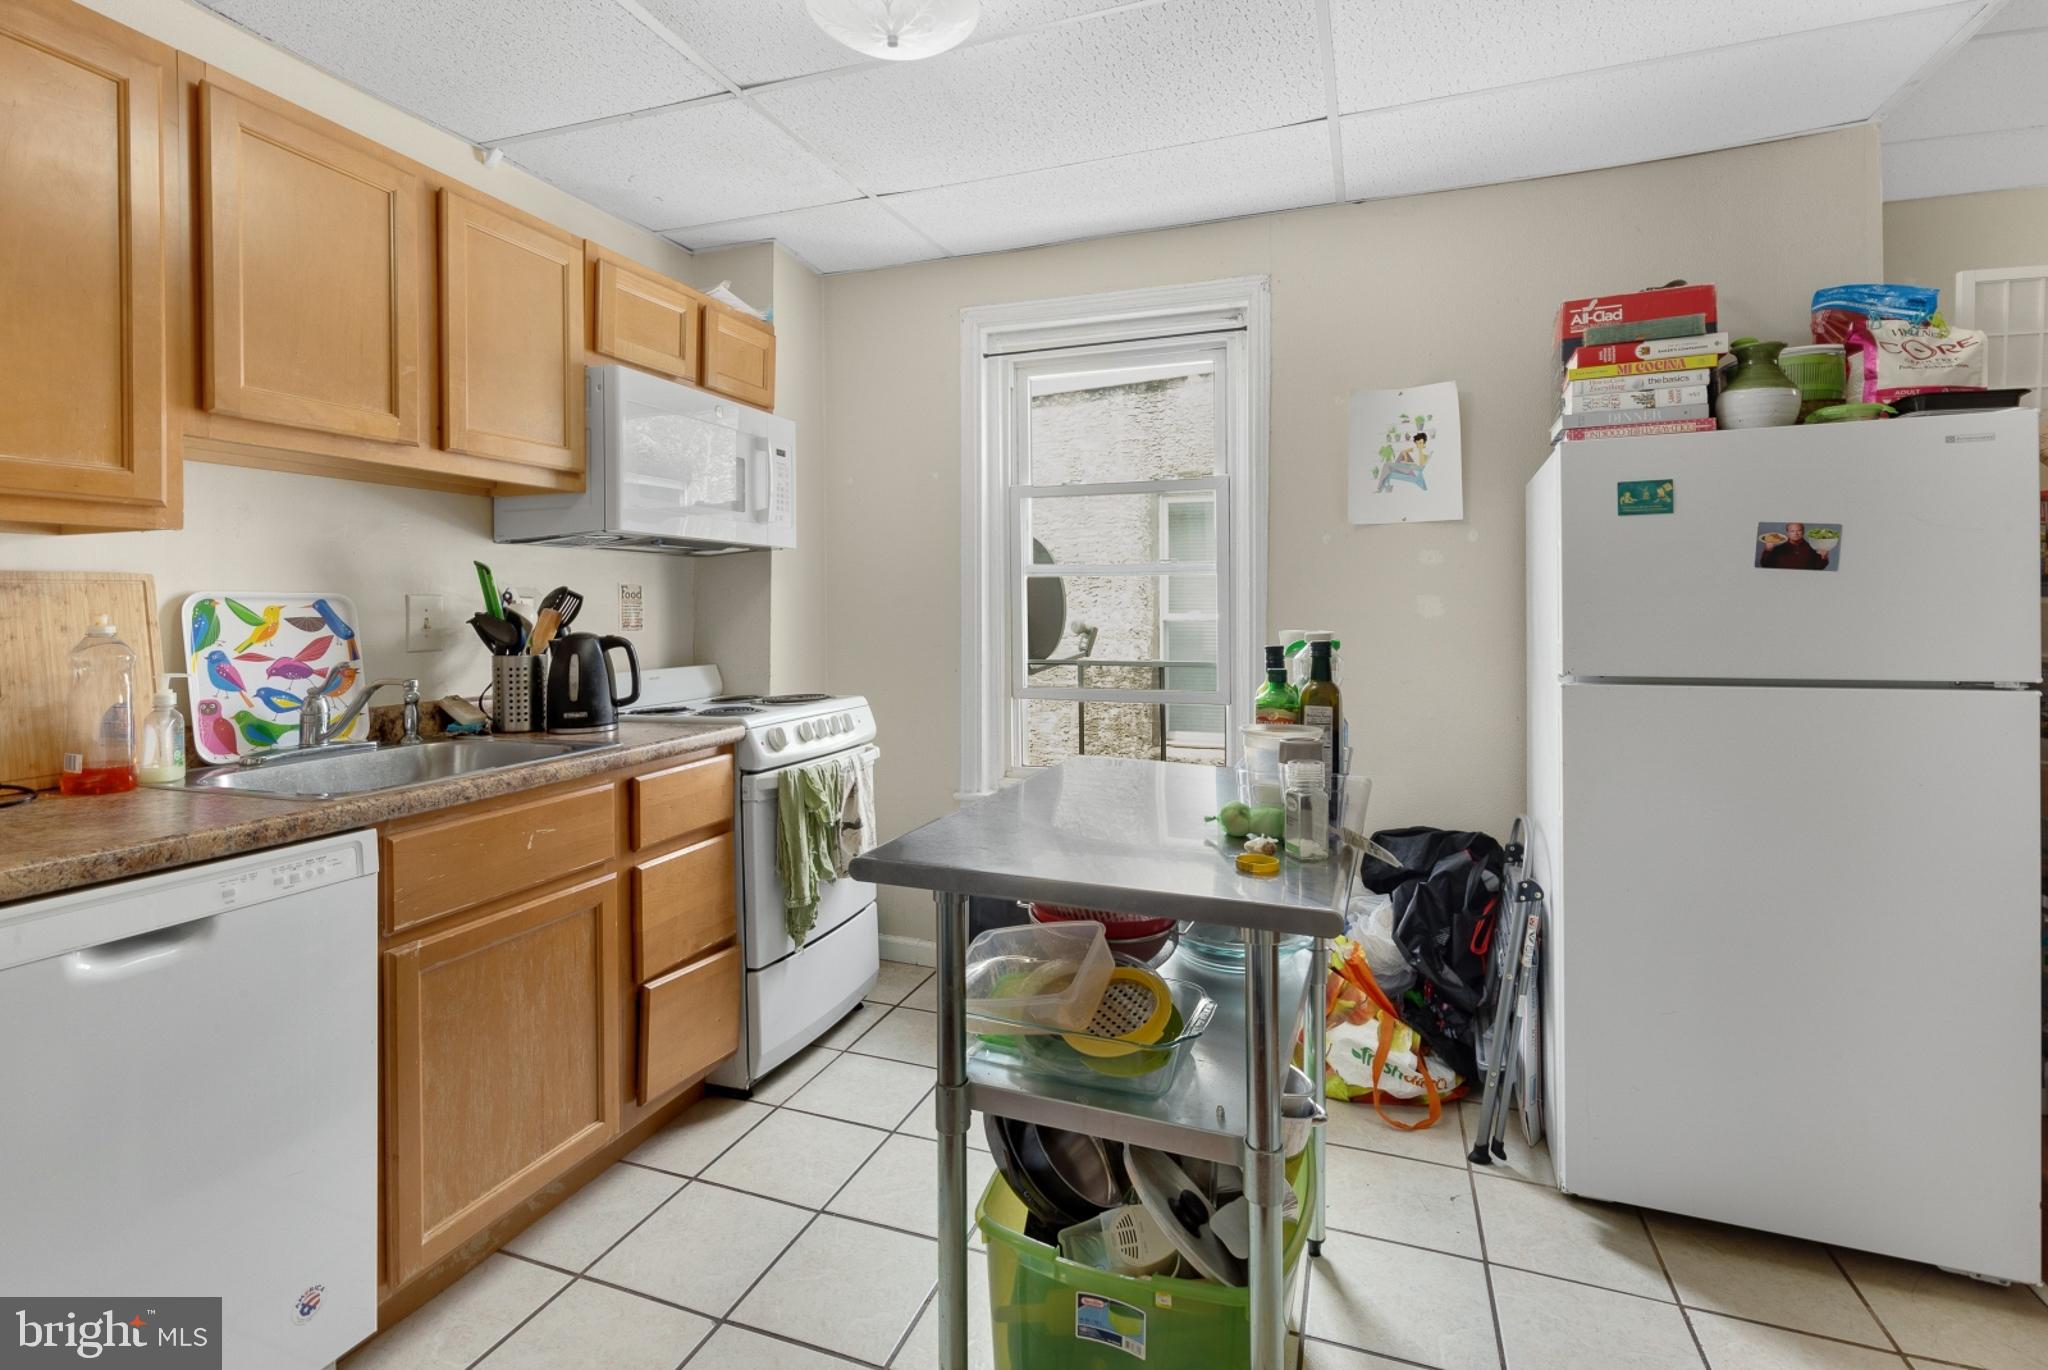 a kitchen with a refrigerator and cabinets